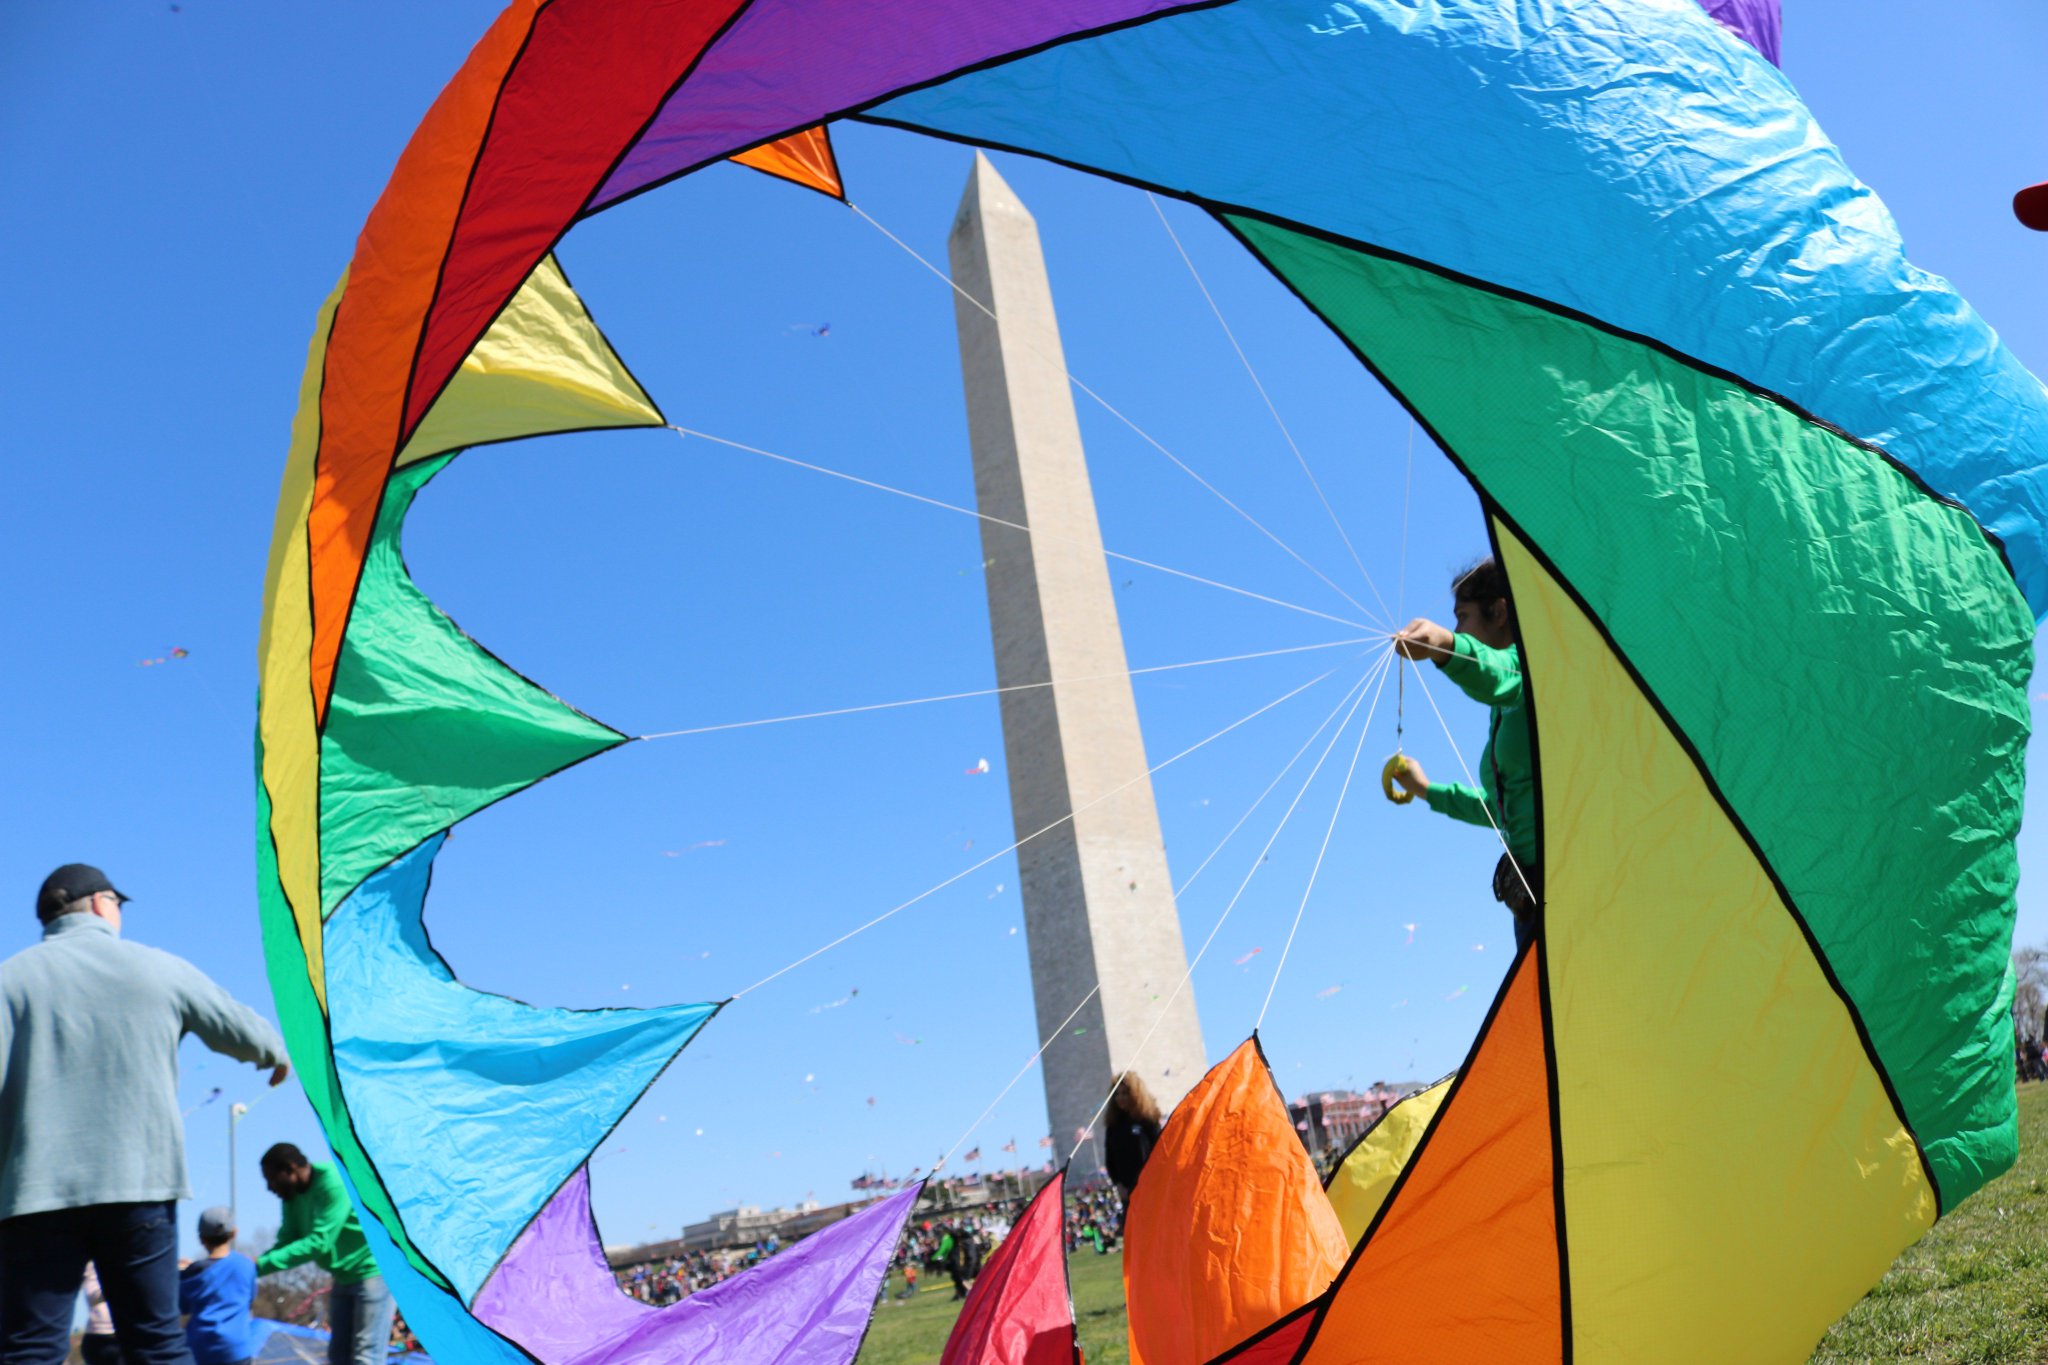 The Blossom Kite Festival presented by @OtsukaUS is this Saturday on the grounds of the Washington Monument! Join us for a day of high-flying fun with competitions, demos, crafts, and more! nationalcherryblossomfestival.org/event/blossom-…